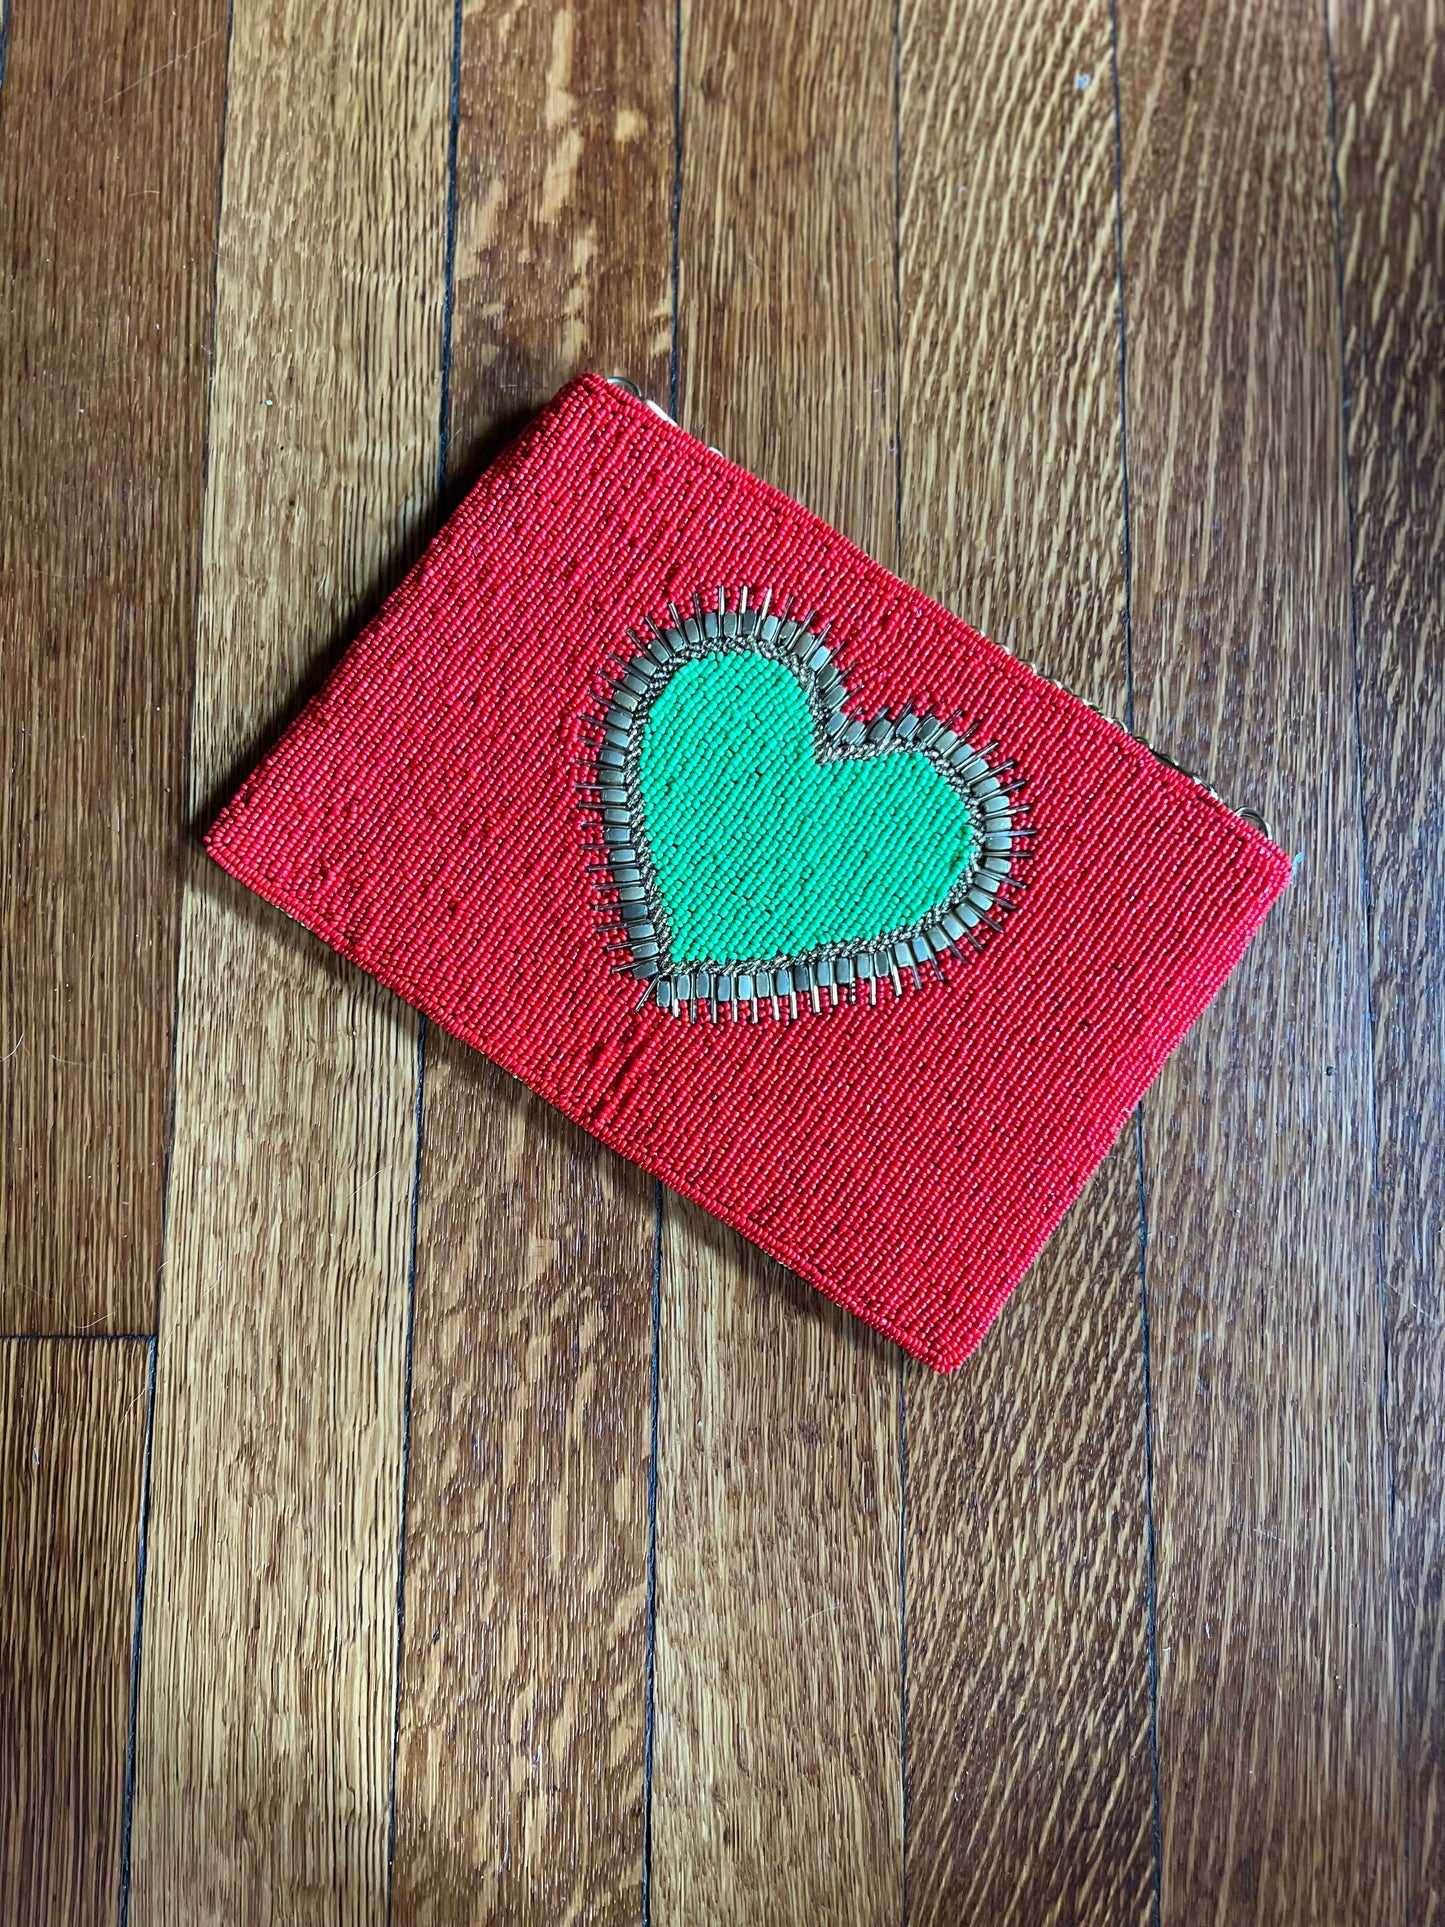 Heart Beaded Crossbody Clutch -Red/Green Bags Indiblossom   